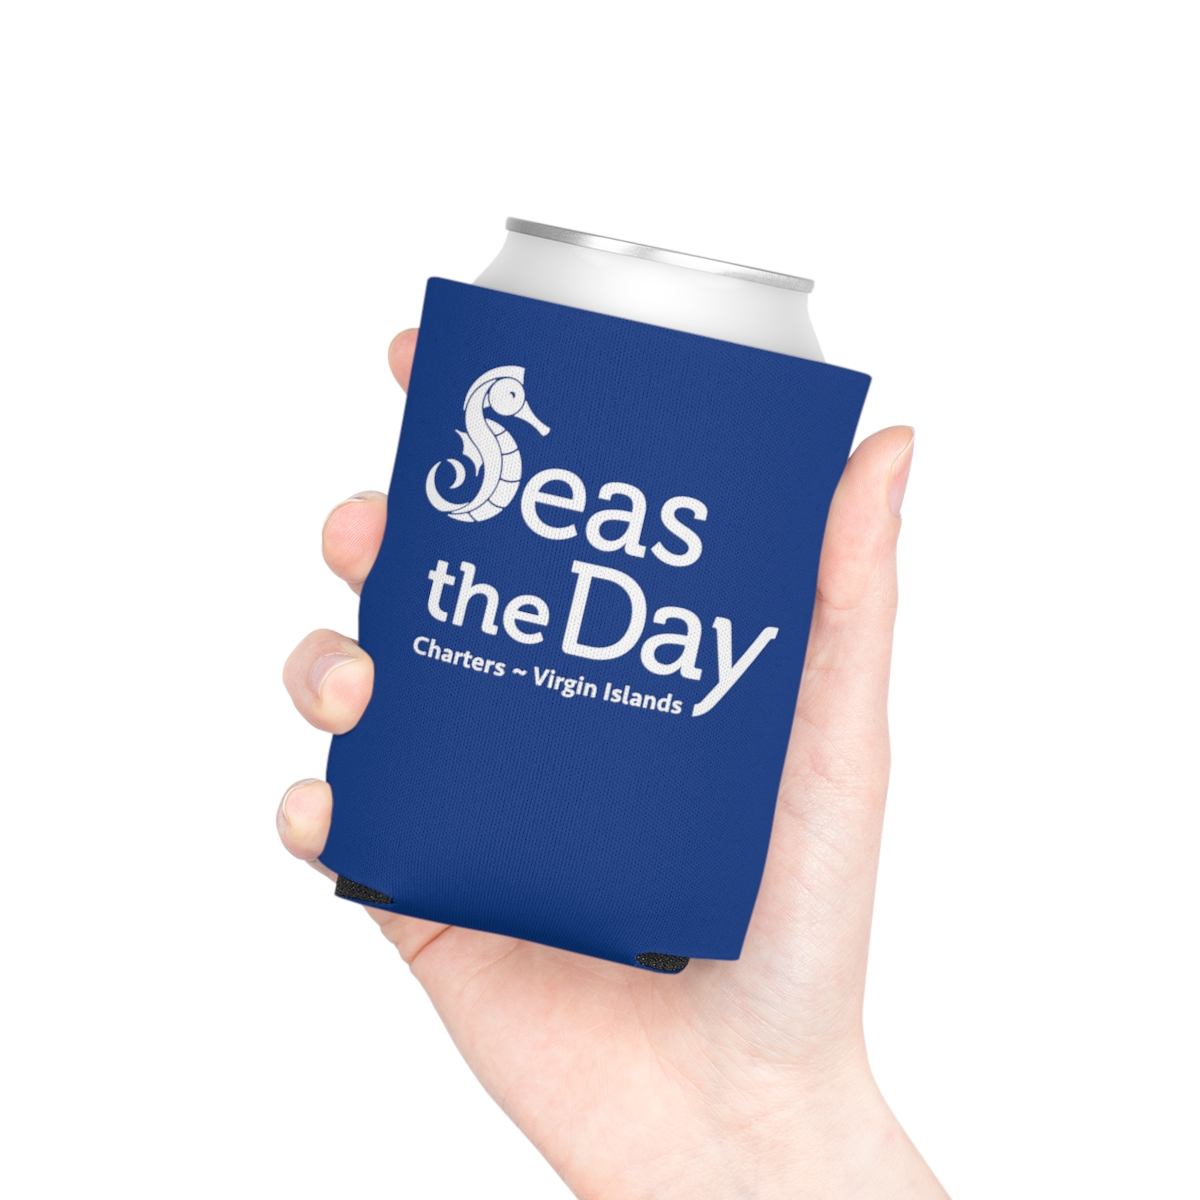 Seas the Day Can Koozie - Blue product thumbnail image